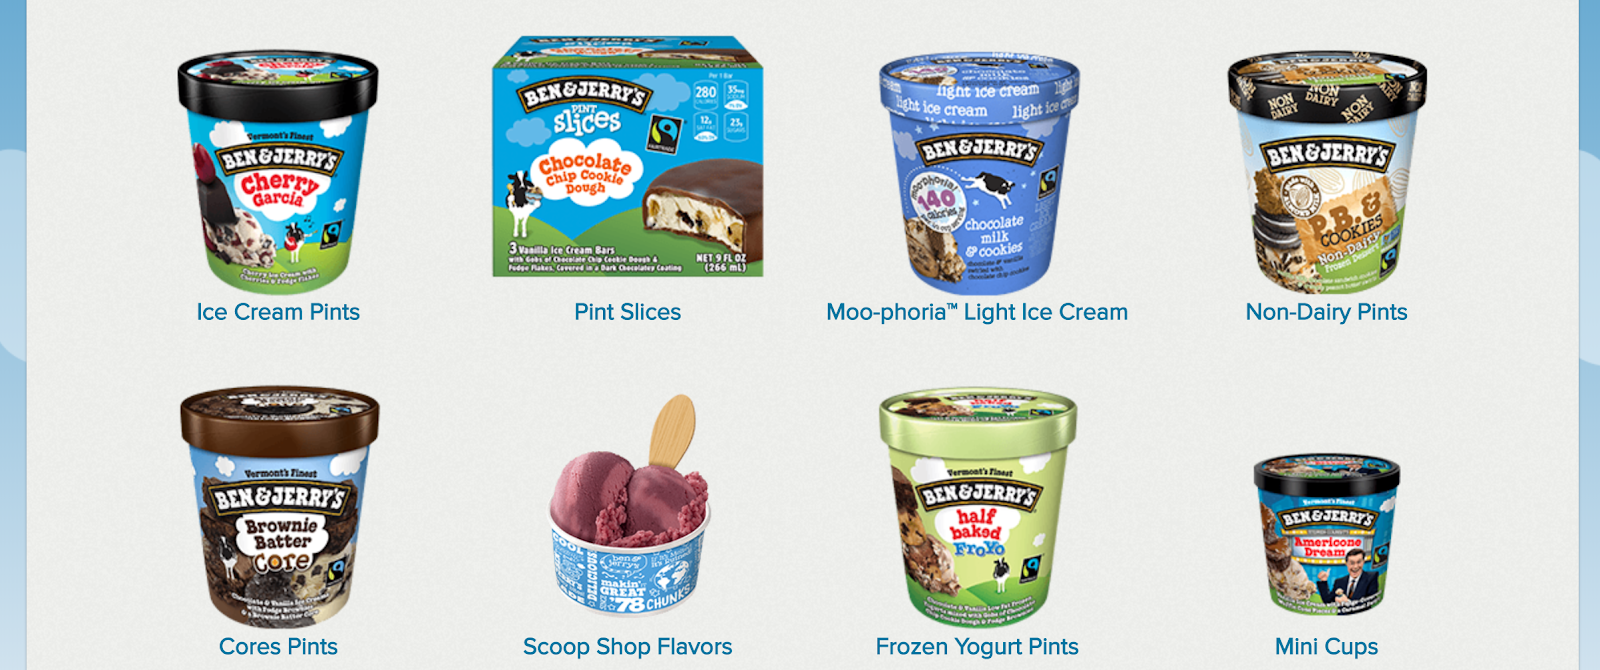 brand safety example ben and jerry